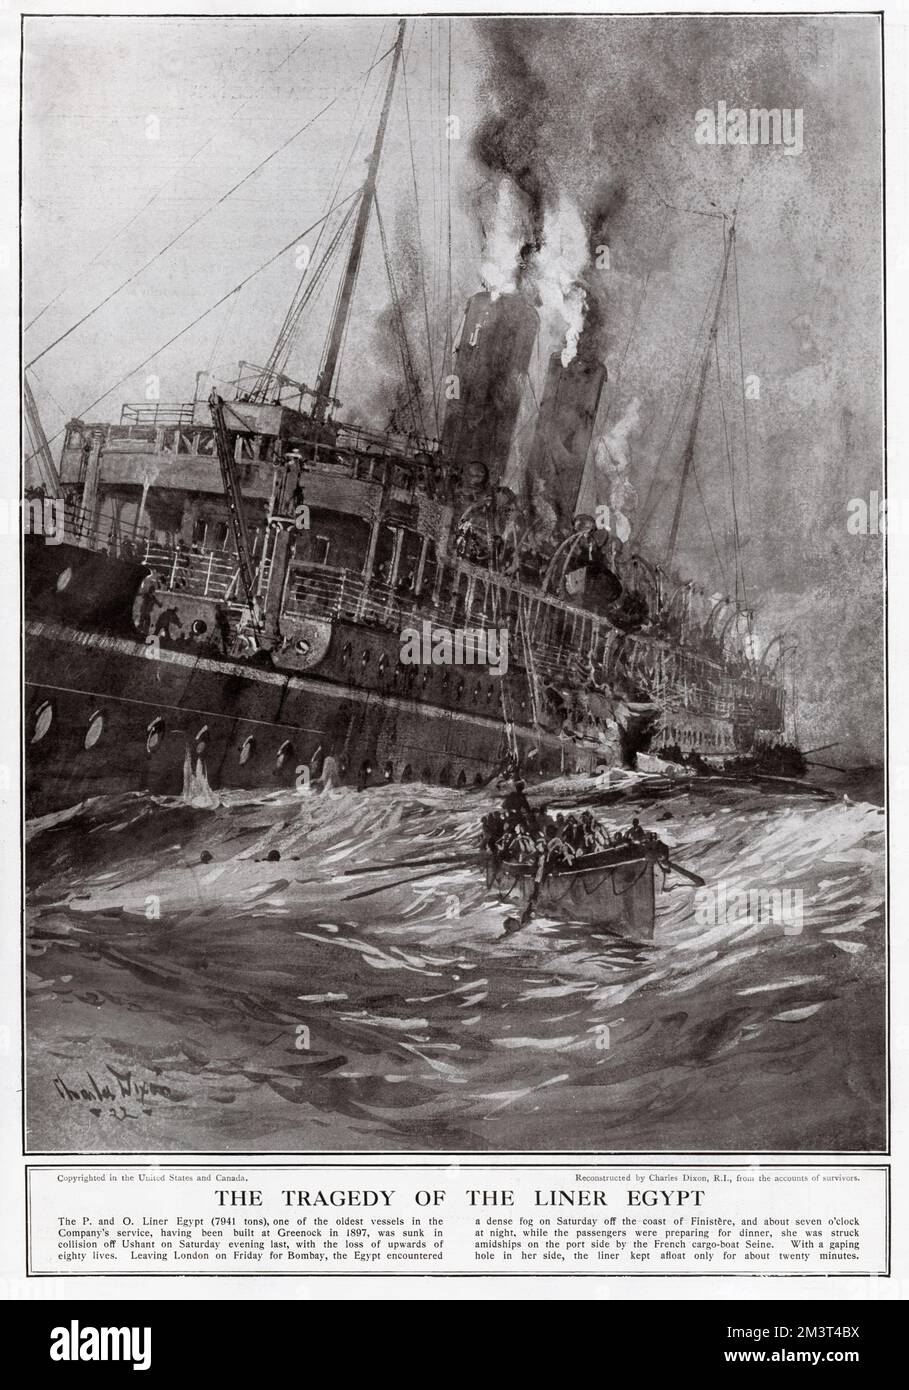 The tragedy of the liner Egypt. The P & O liner SS Egypt sank on 20th May 1922 in the Celtic Sea after a collision with a French cargo boat Seine in dense fog. Upwards of 80 lives were lost. The liner was also carrying a valuable cargo of gold and silver which wasn't possible to salvage until the 1930s. Stock Photo